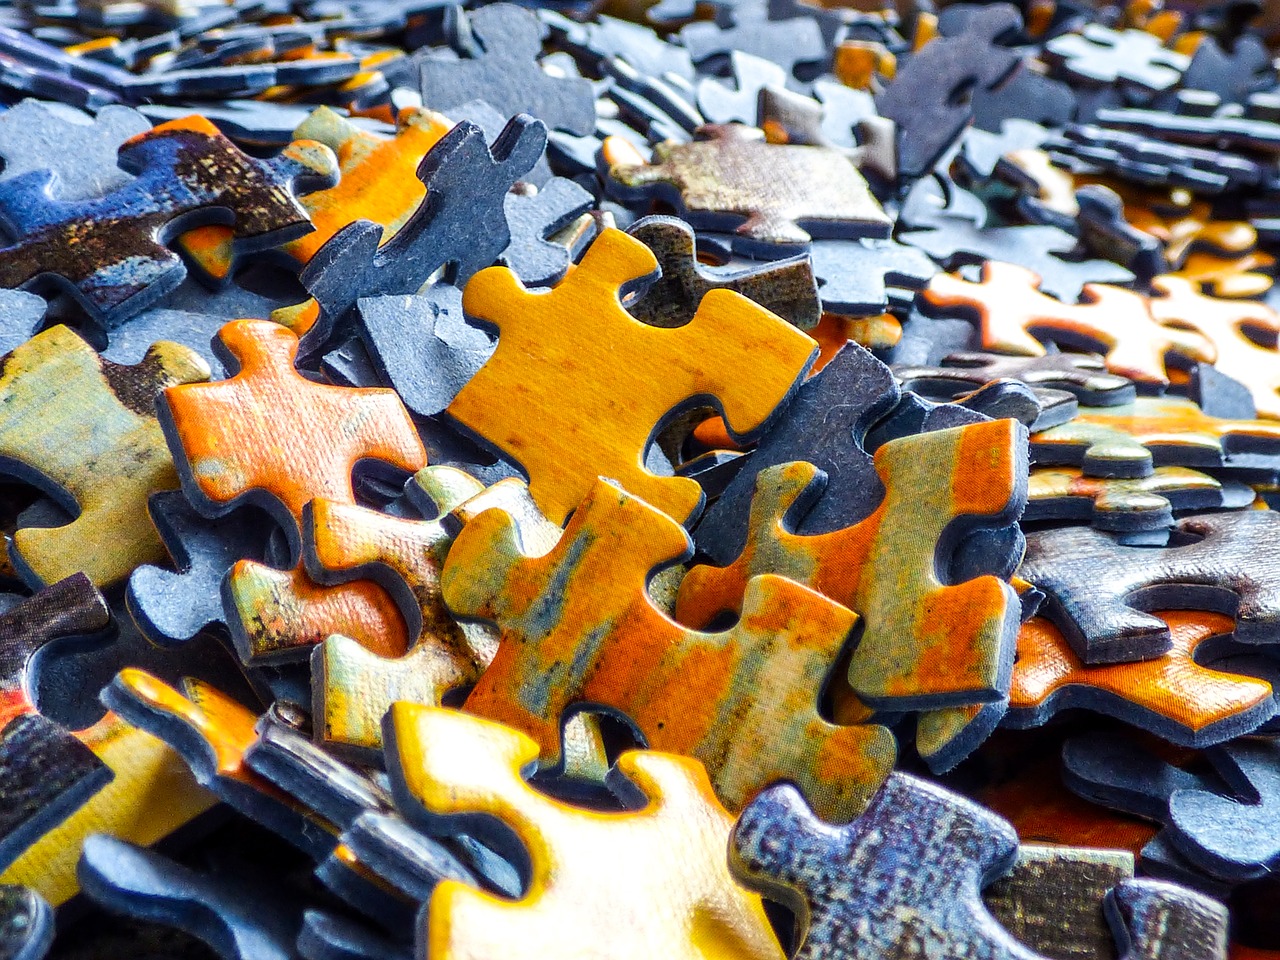 Jigsaw puzzle Clubs: 5 Reasons to Join a Group